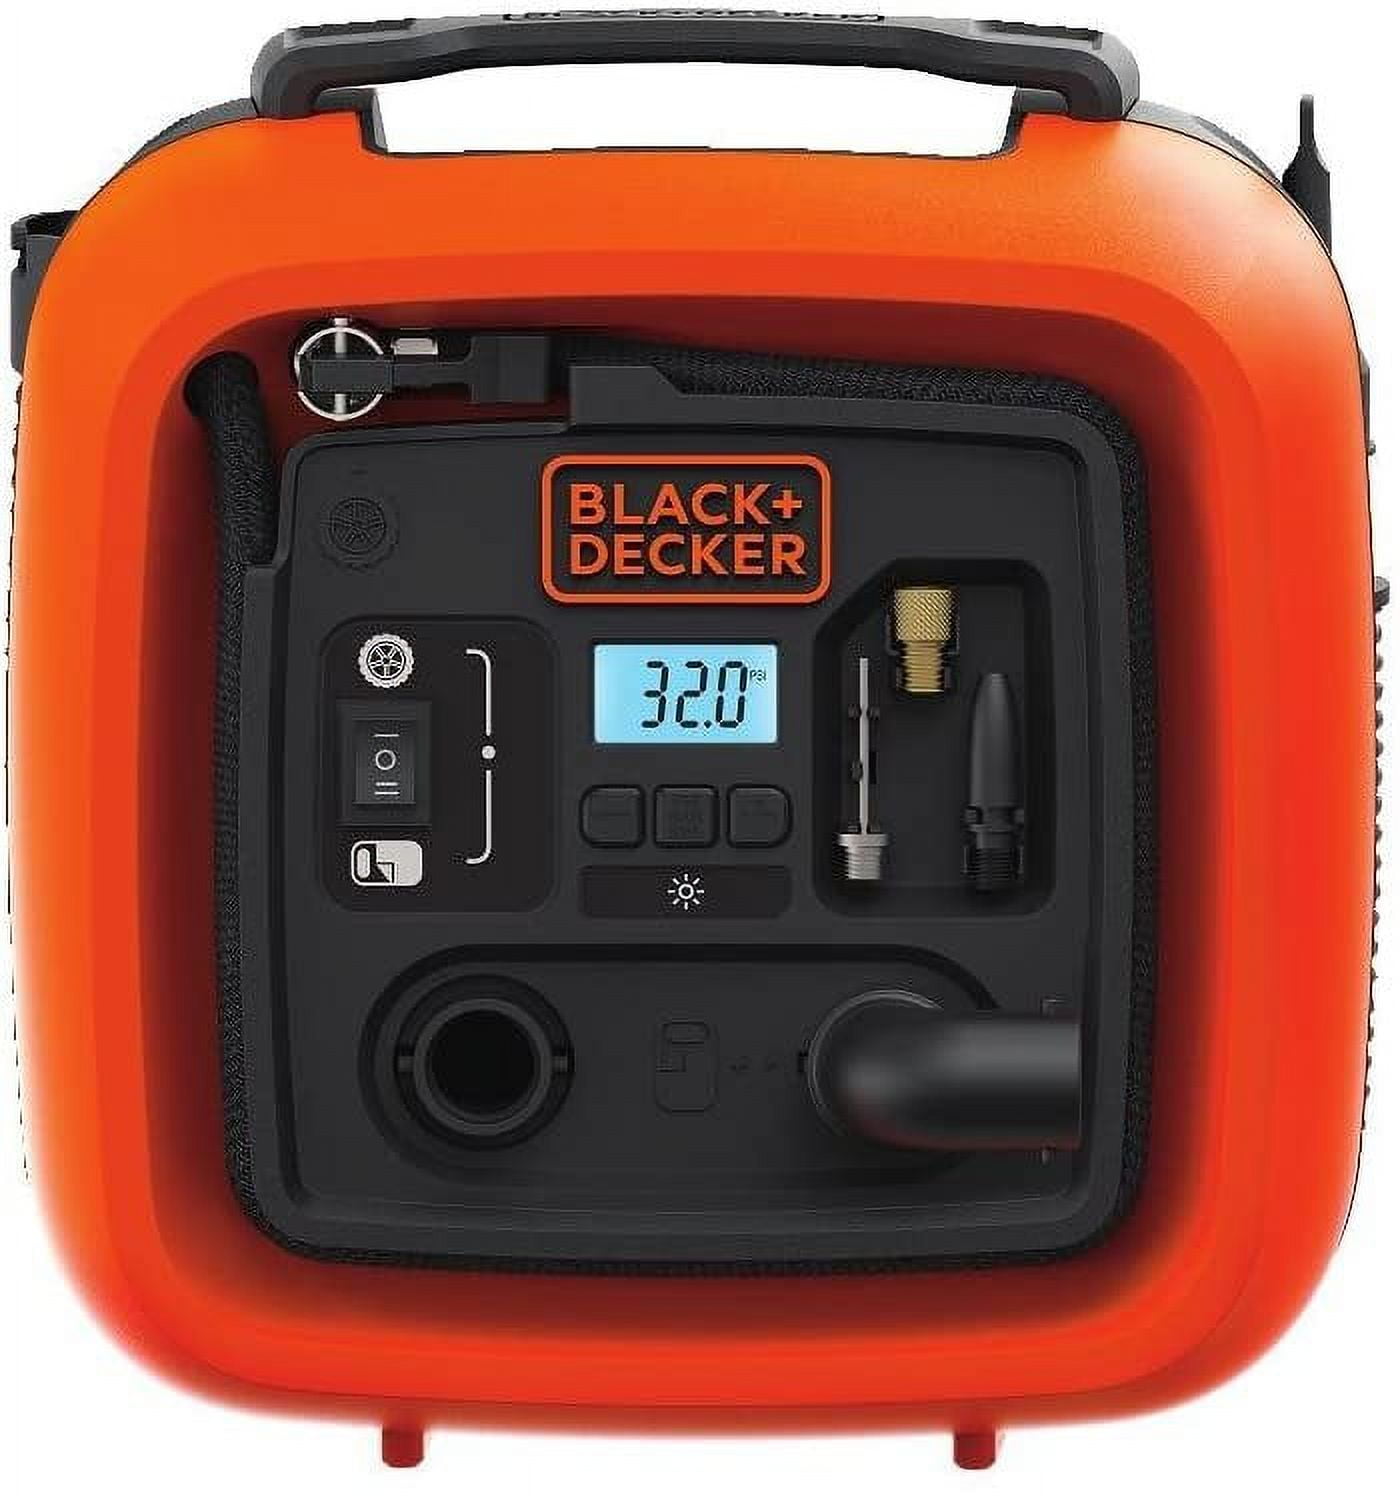  BLACK+DECKER 20V MAX* Cordless Tire Inflator, Cordless & Corded  Power, Tool Only (BDINF20C) : Sports & Outdoors